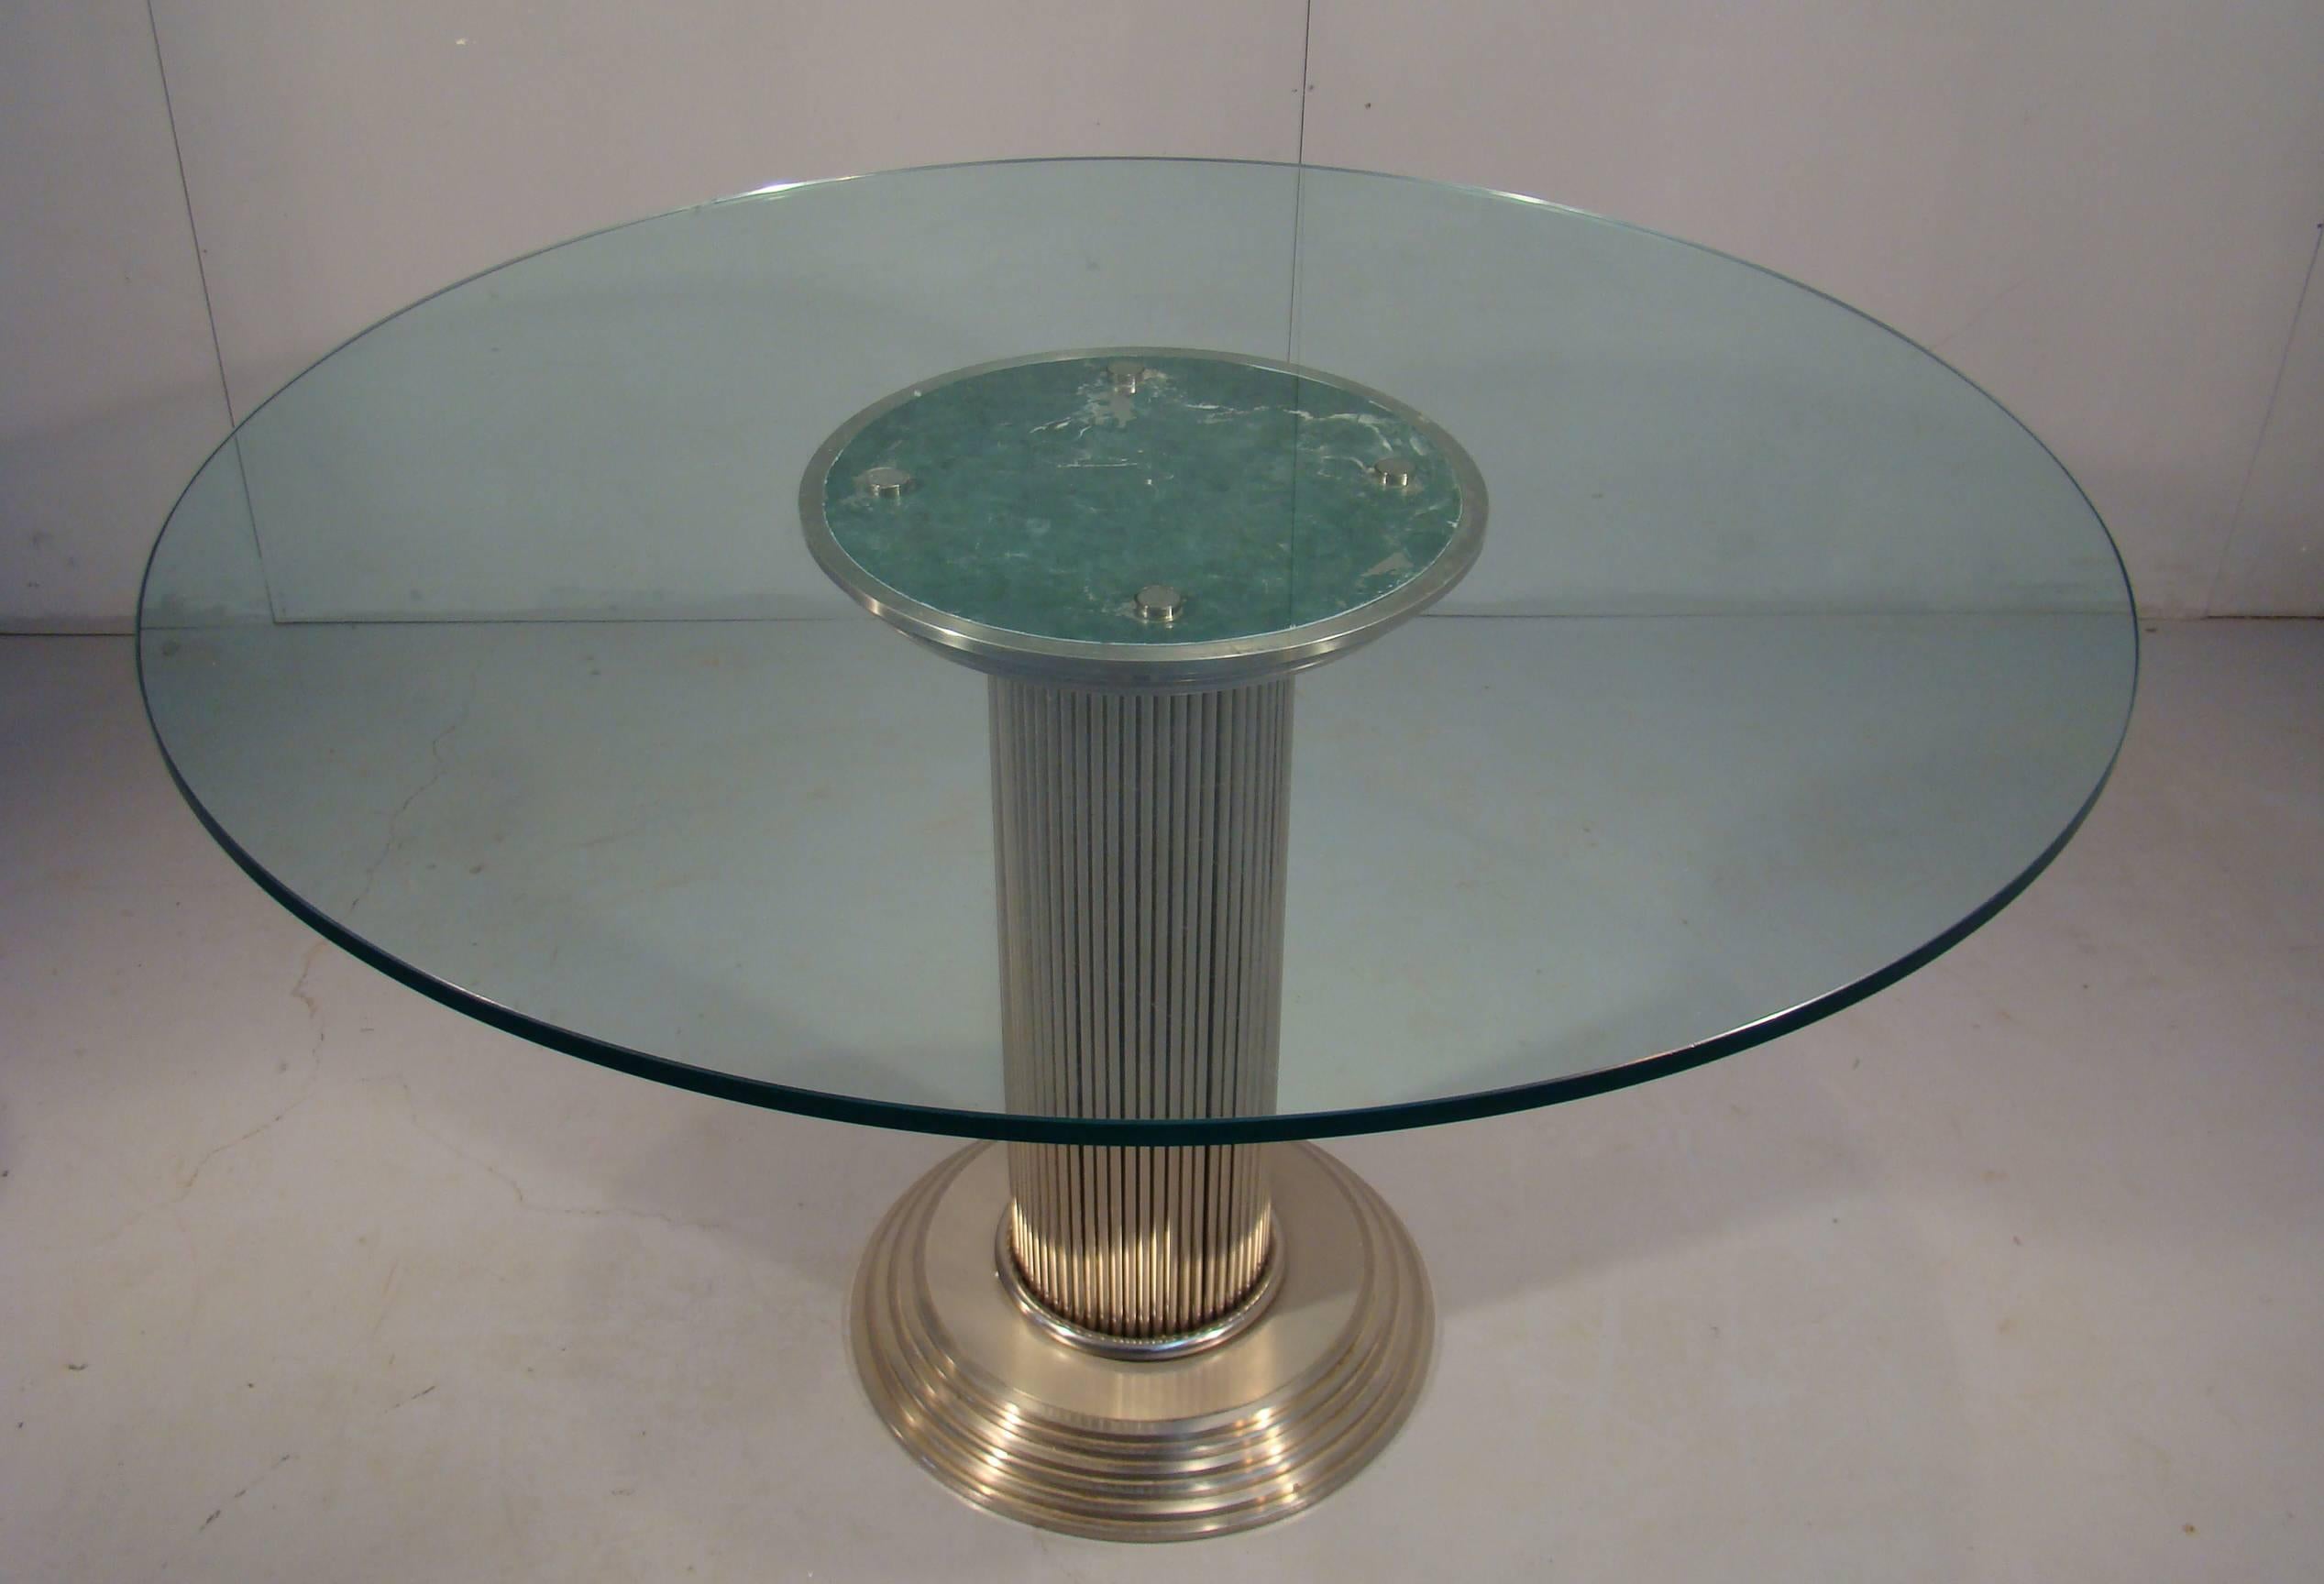 Nicked-plated brass table with glass top, Italy, circa 1960.